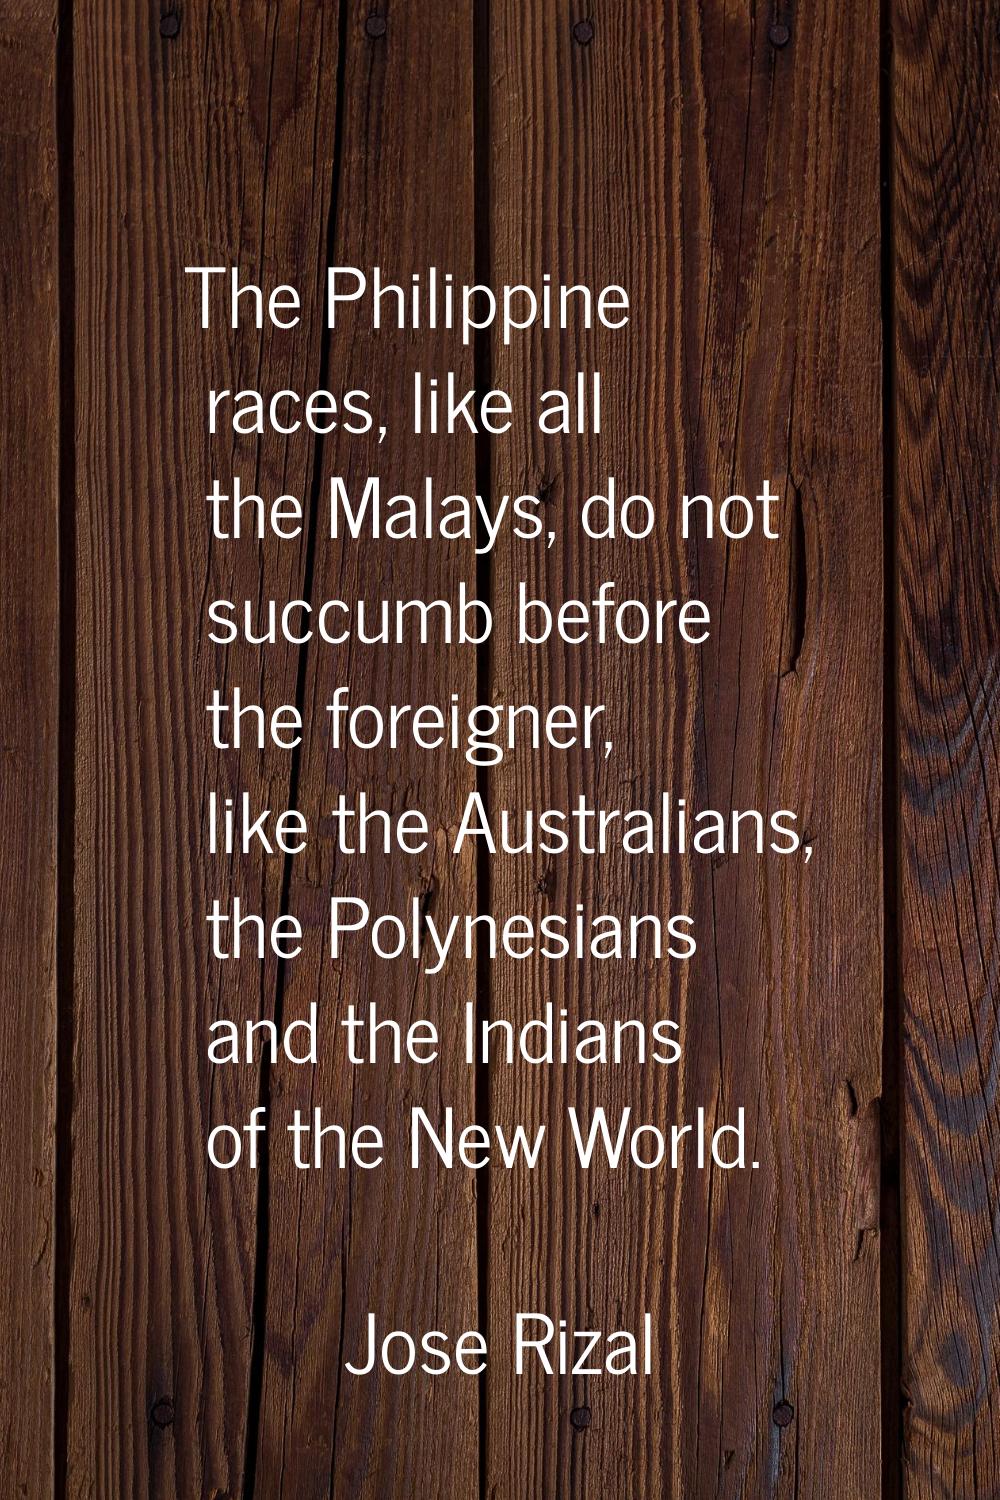 The Philippine races, like all the Malays, do not succumb before the foreigner, like the Australian